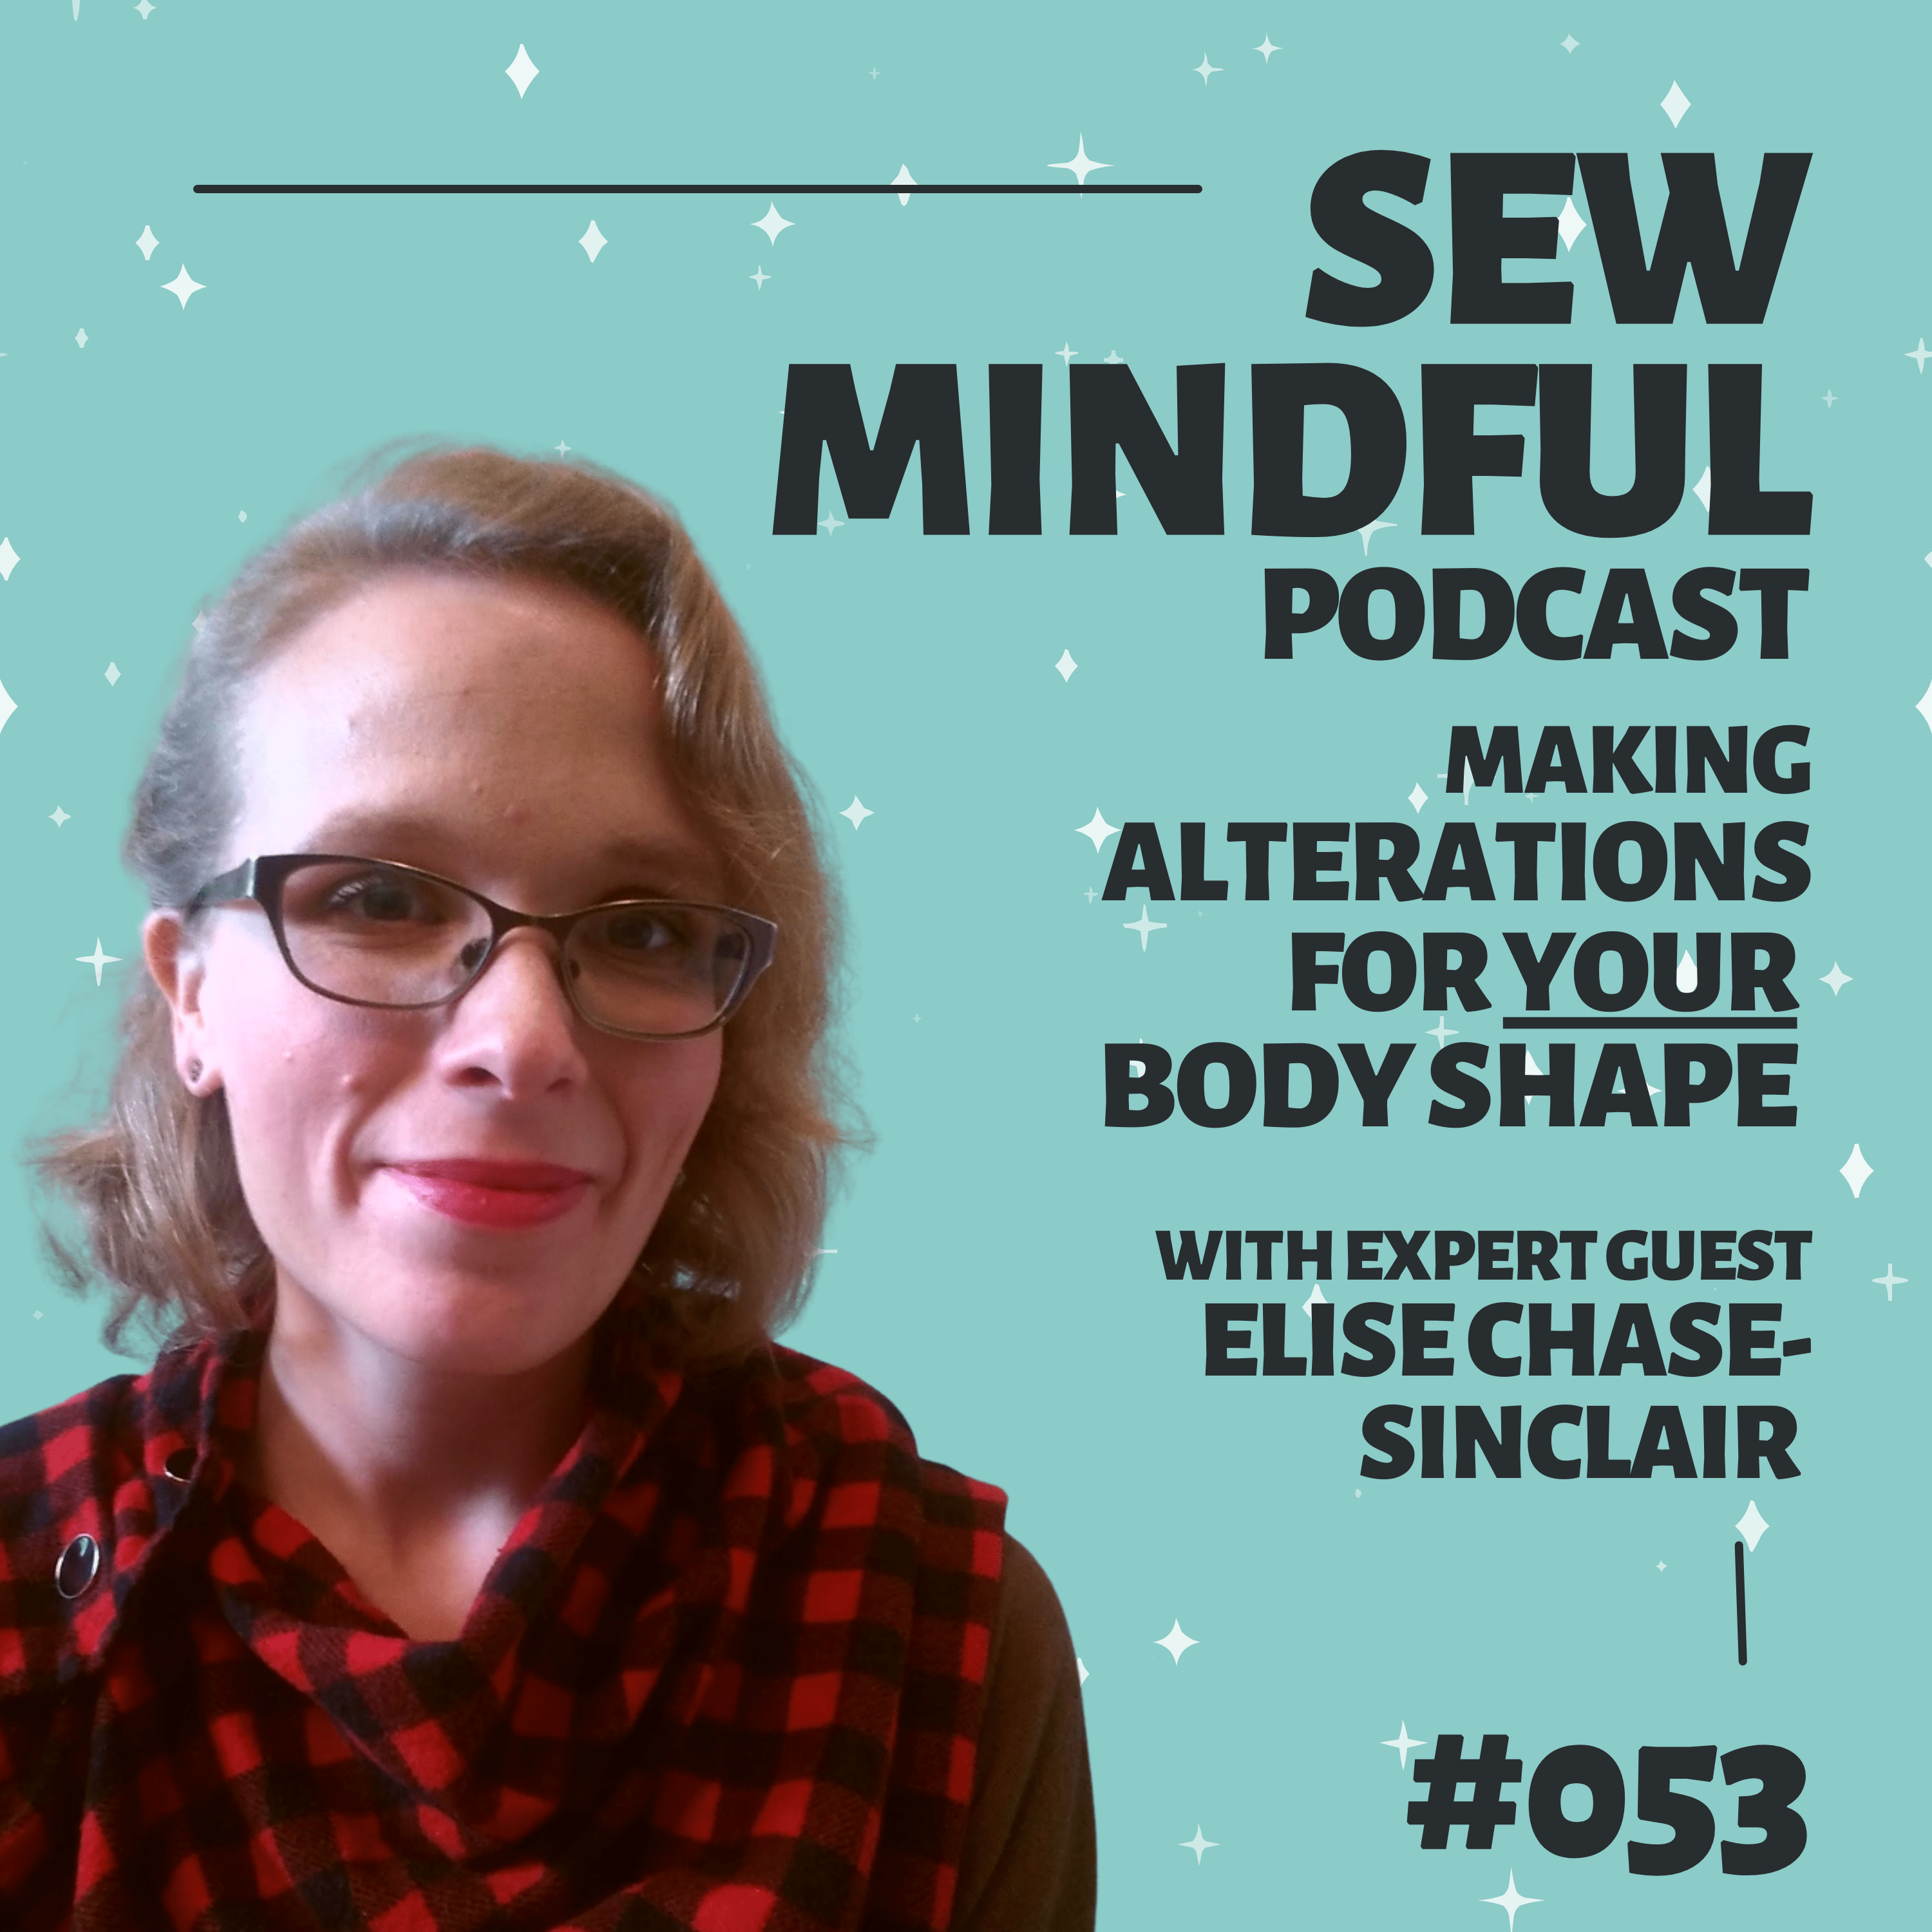 Sew Mindful Podcast Interview